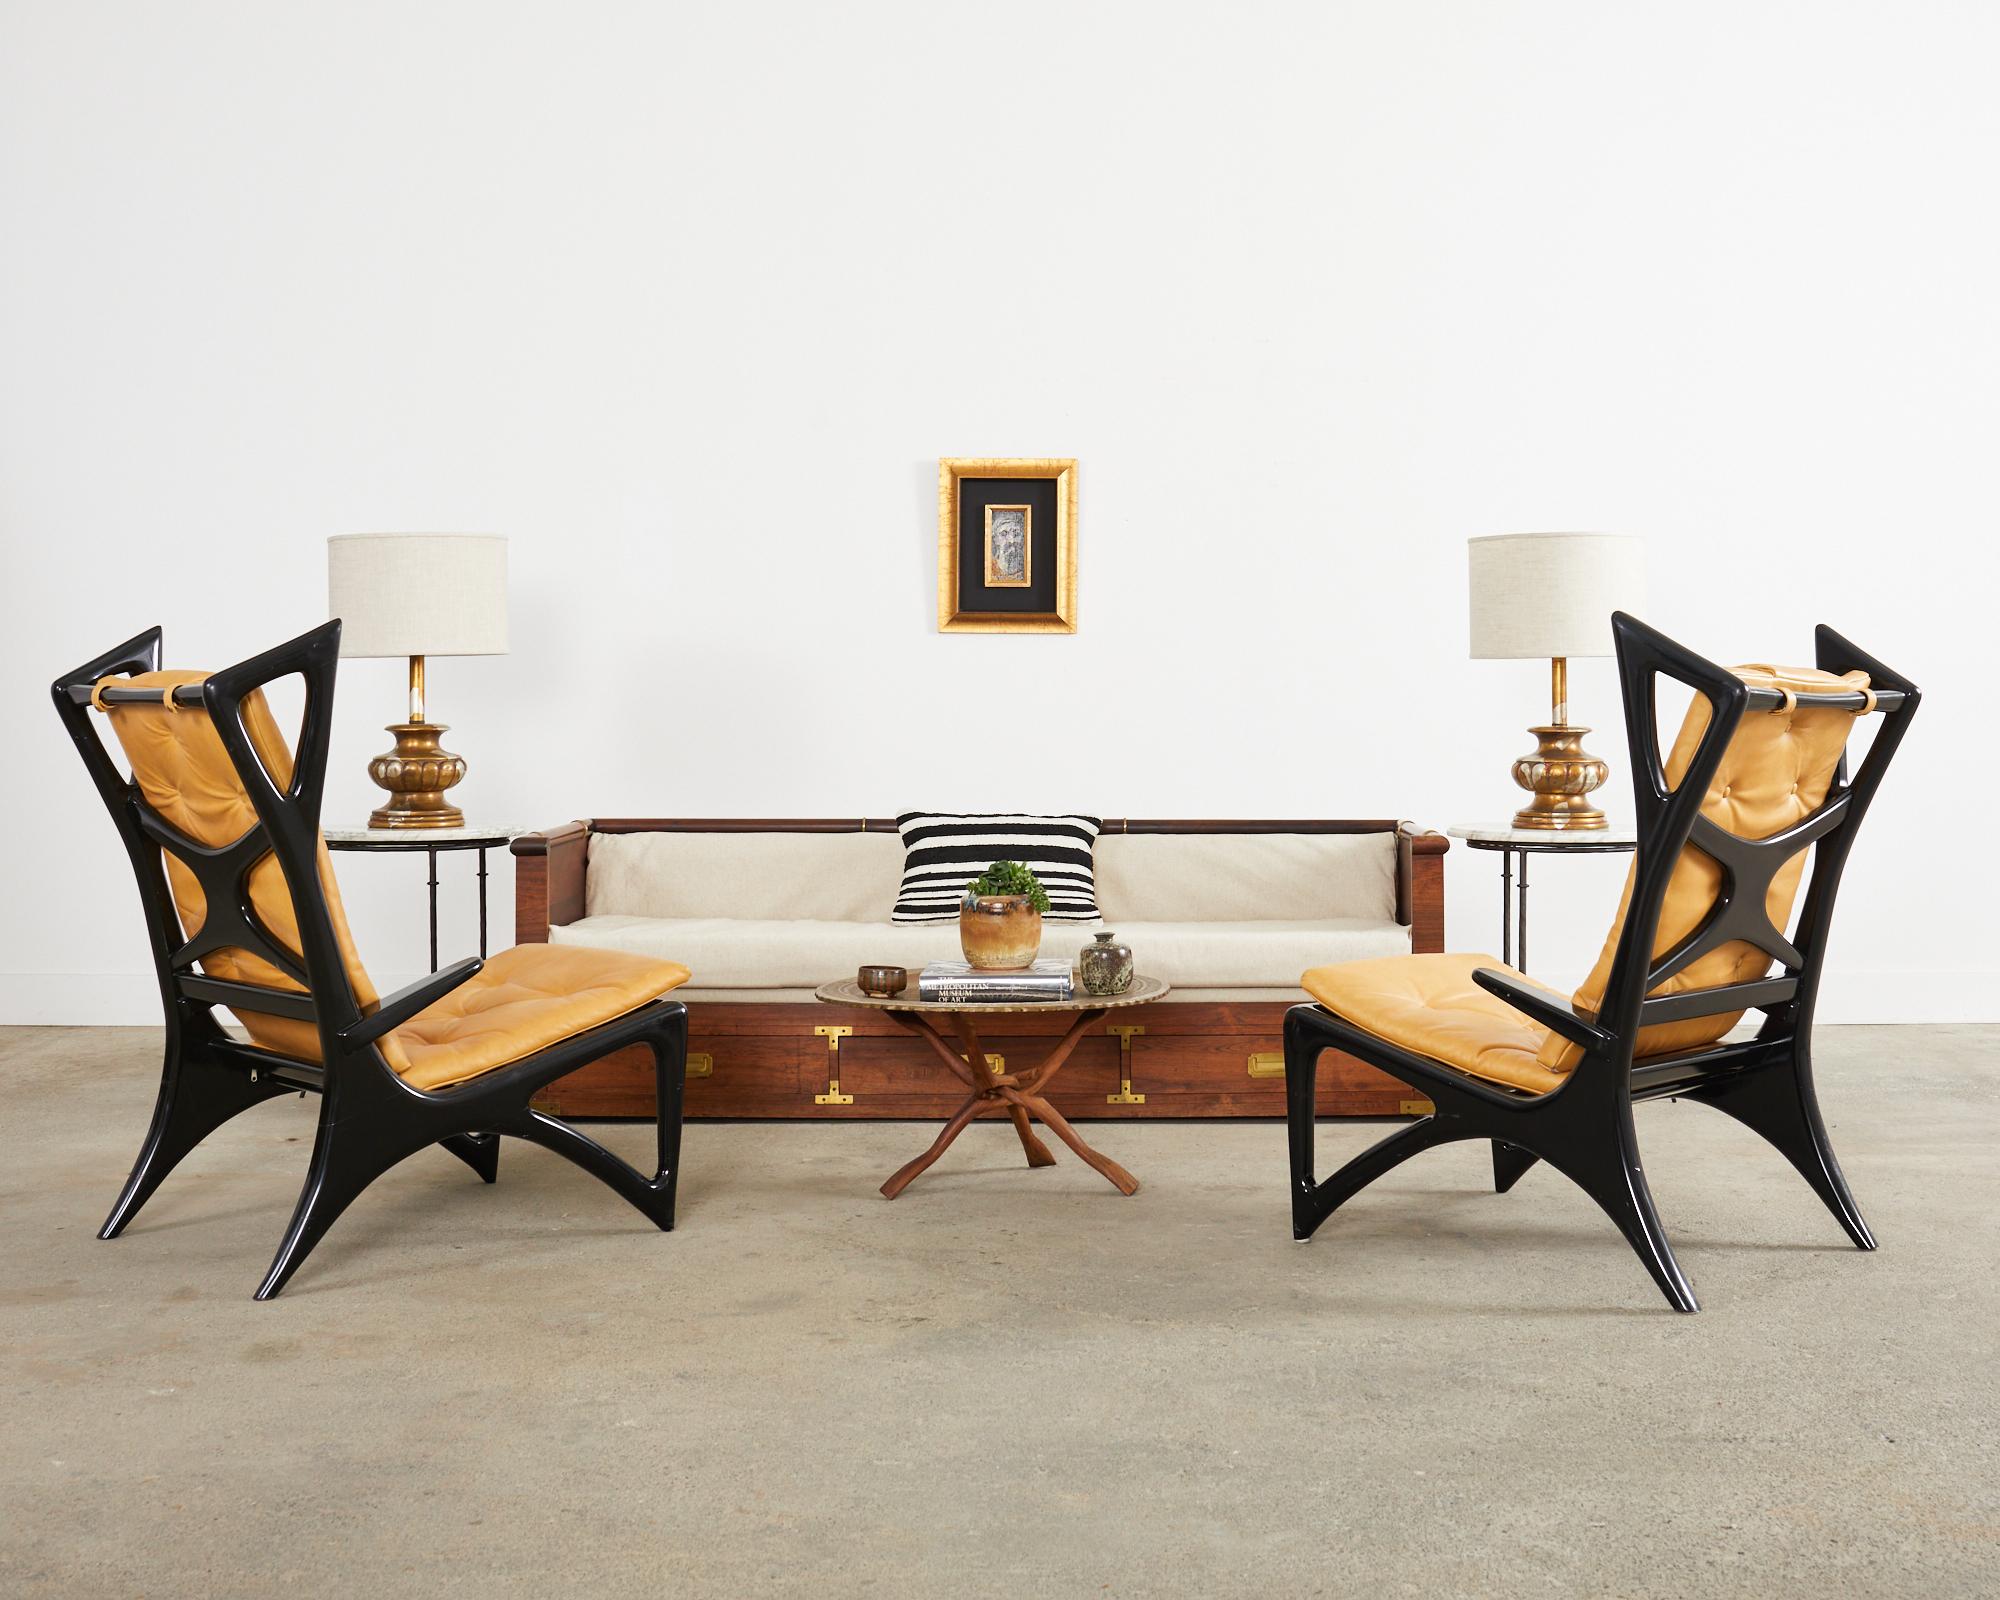 Dramatic matching pair of Italian Carrara marble top drink tables or side tables. The round tables feature stylish iron faux-bamboo bases with three legs that are conjoined in the middle and gracefully splayed on the ends. The round marble tops have